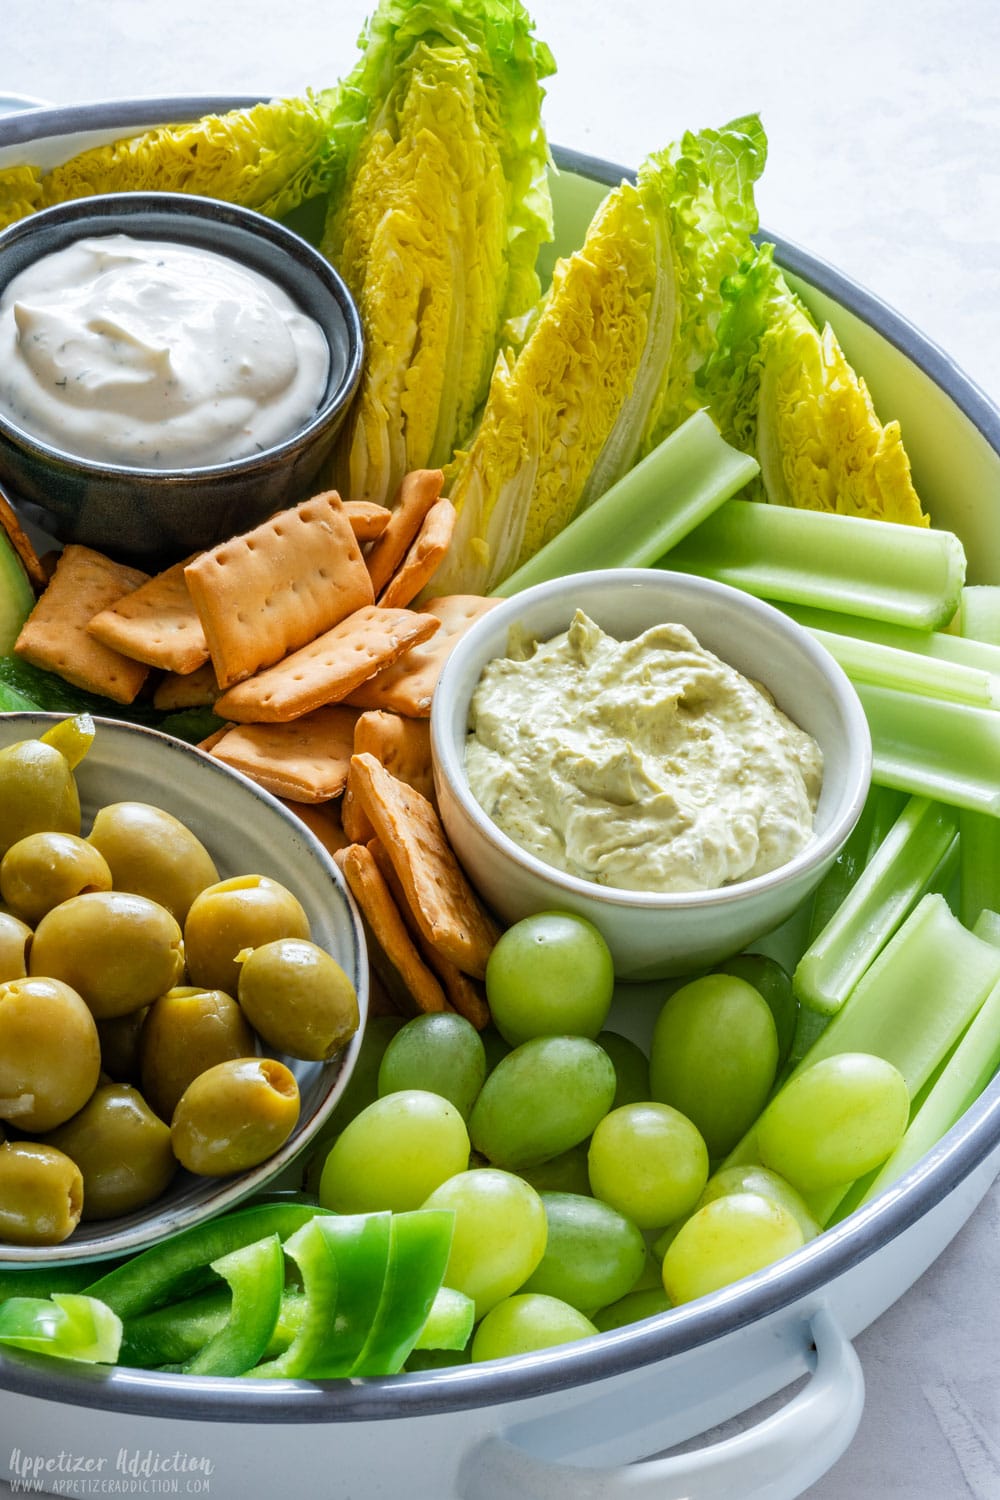 Close-up of snack board with green vegetables and fruits with dip.